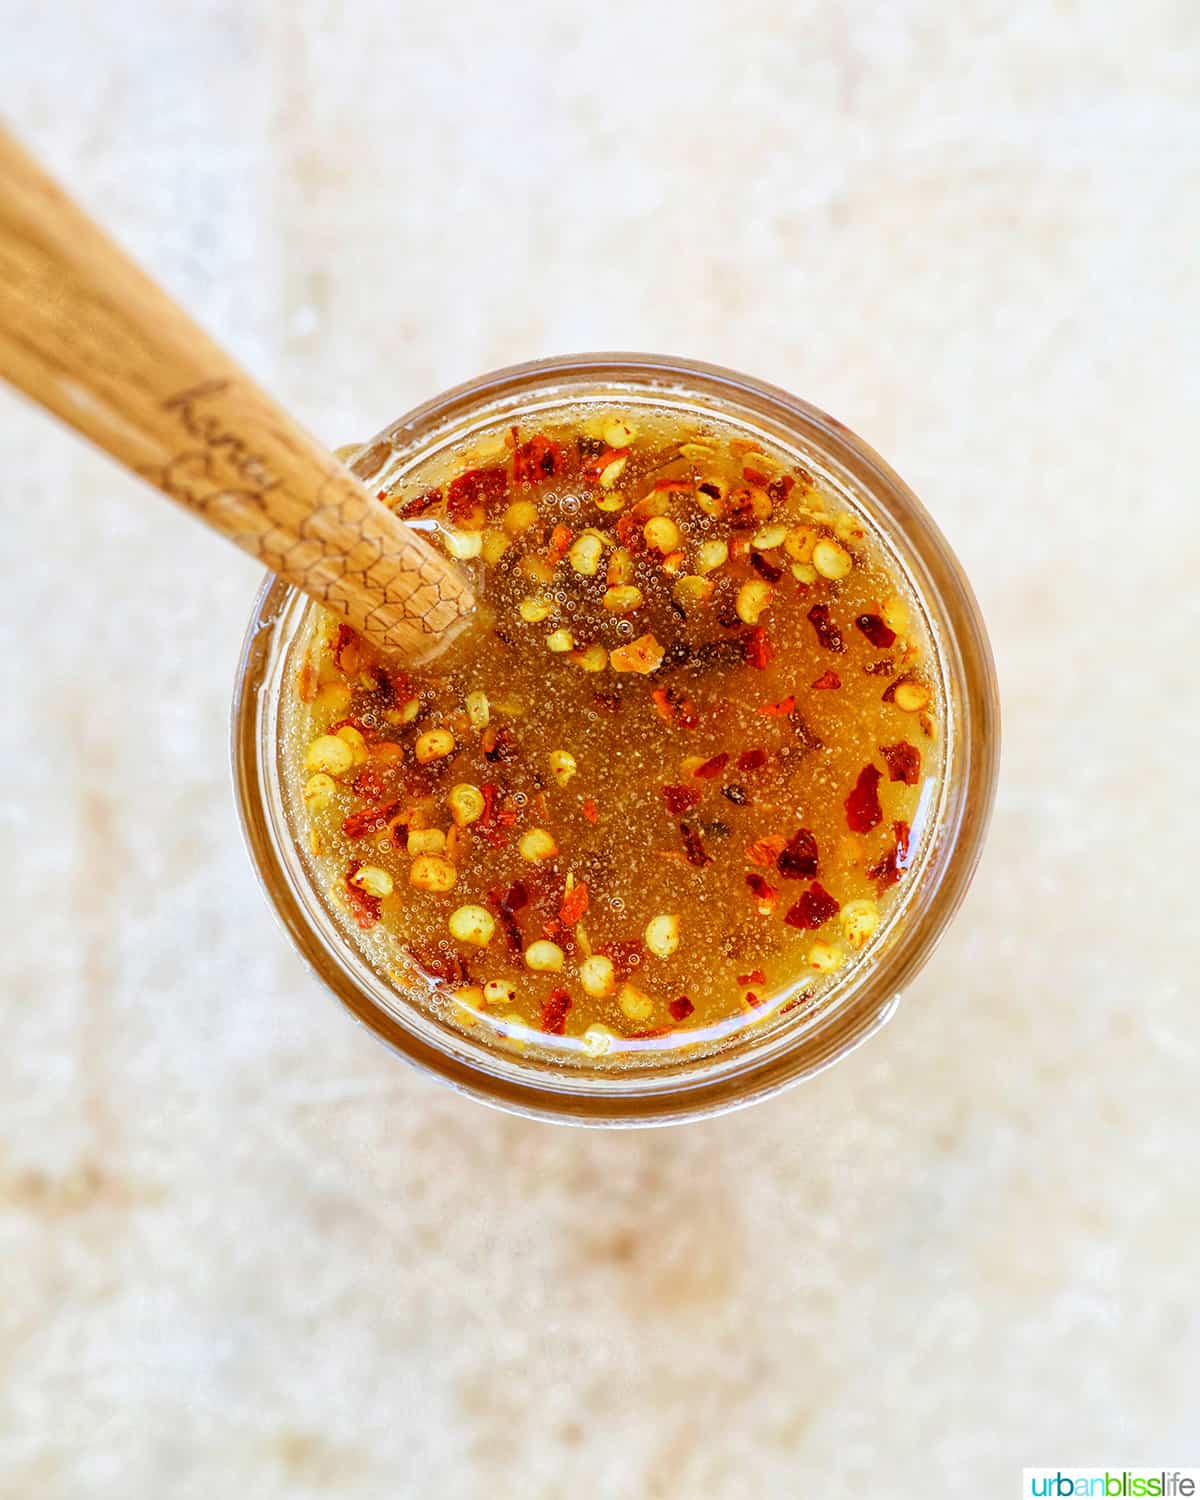 wooden spoon sticking out of the top of an opened jar of hot honey sauce.